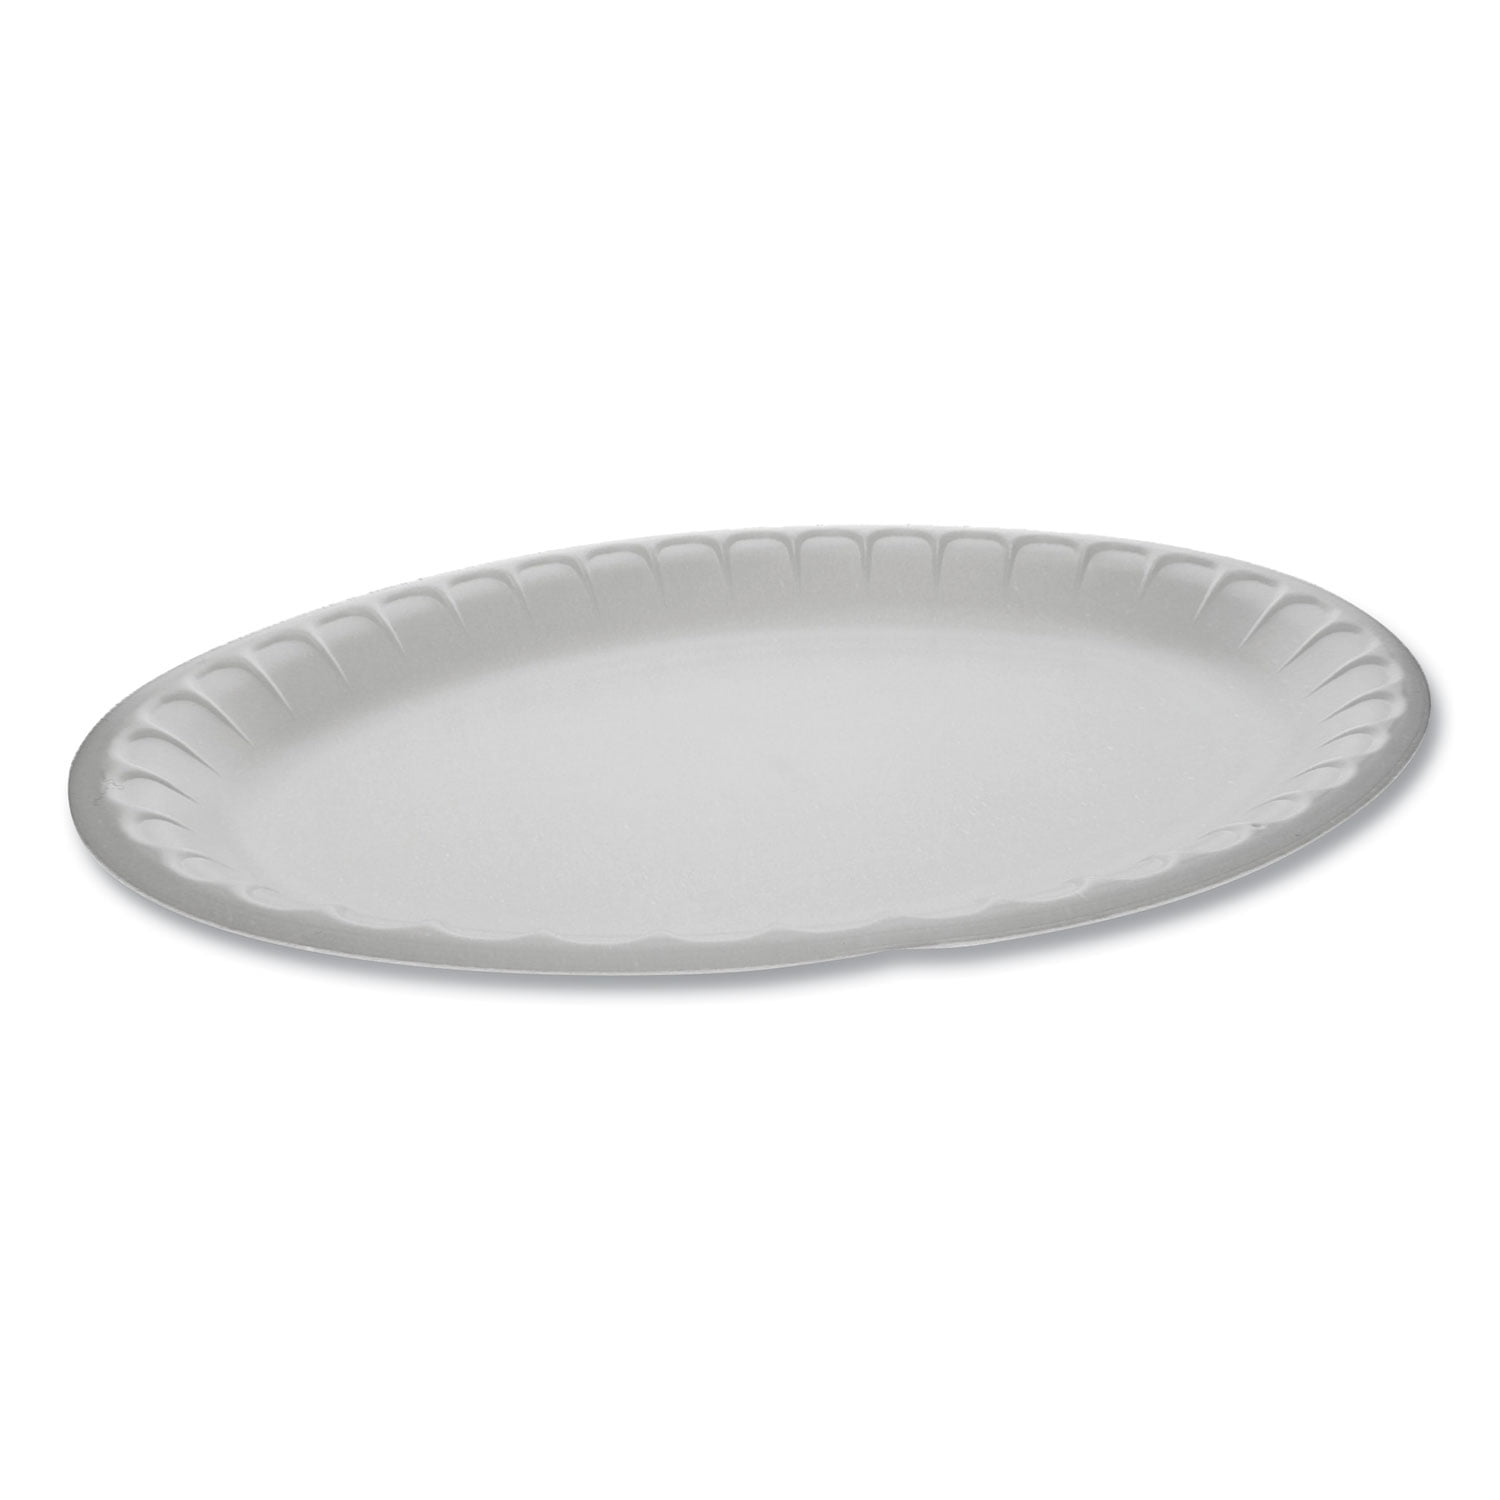 8.5-Inch by 11.5-Inch Kitchen Supply White Porcelain Oval Platter